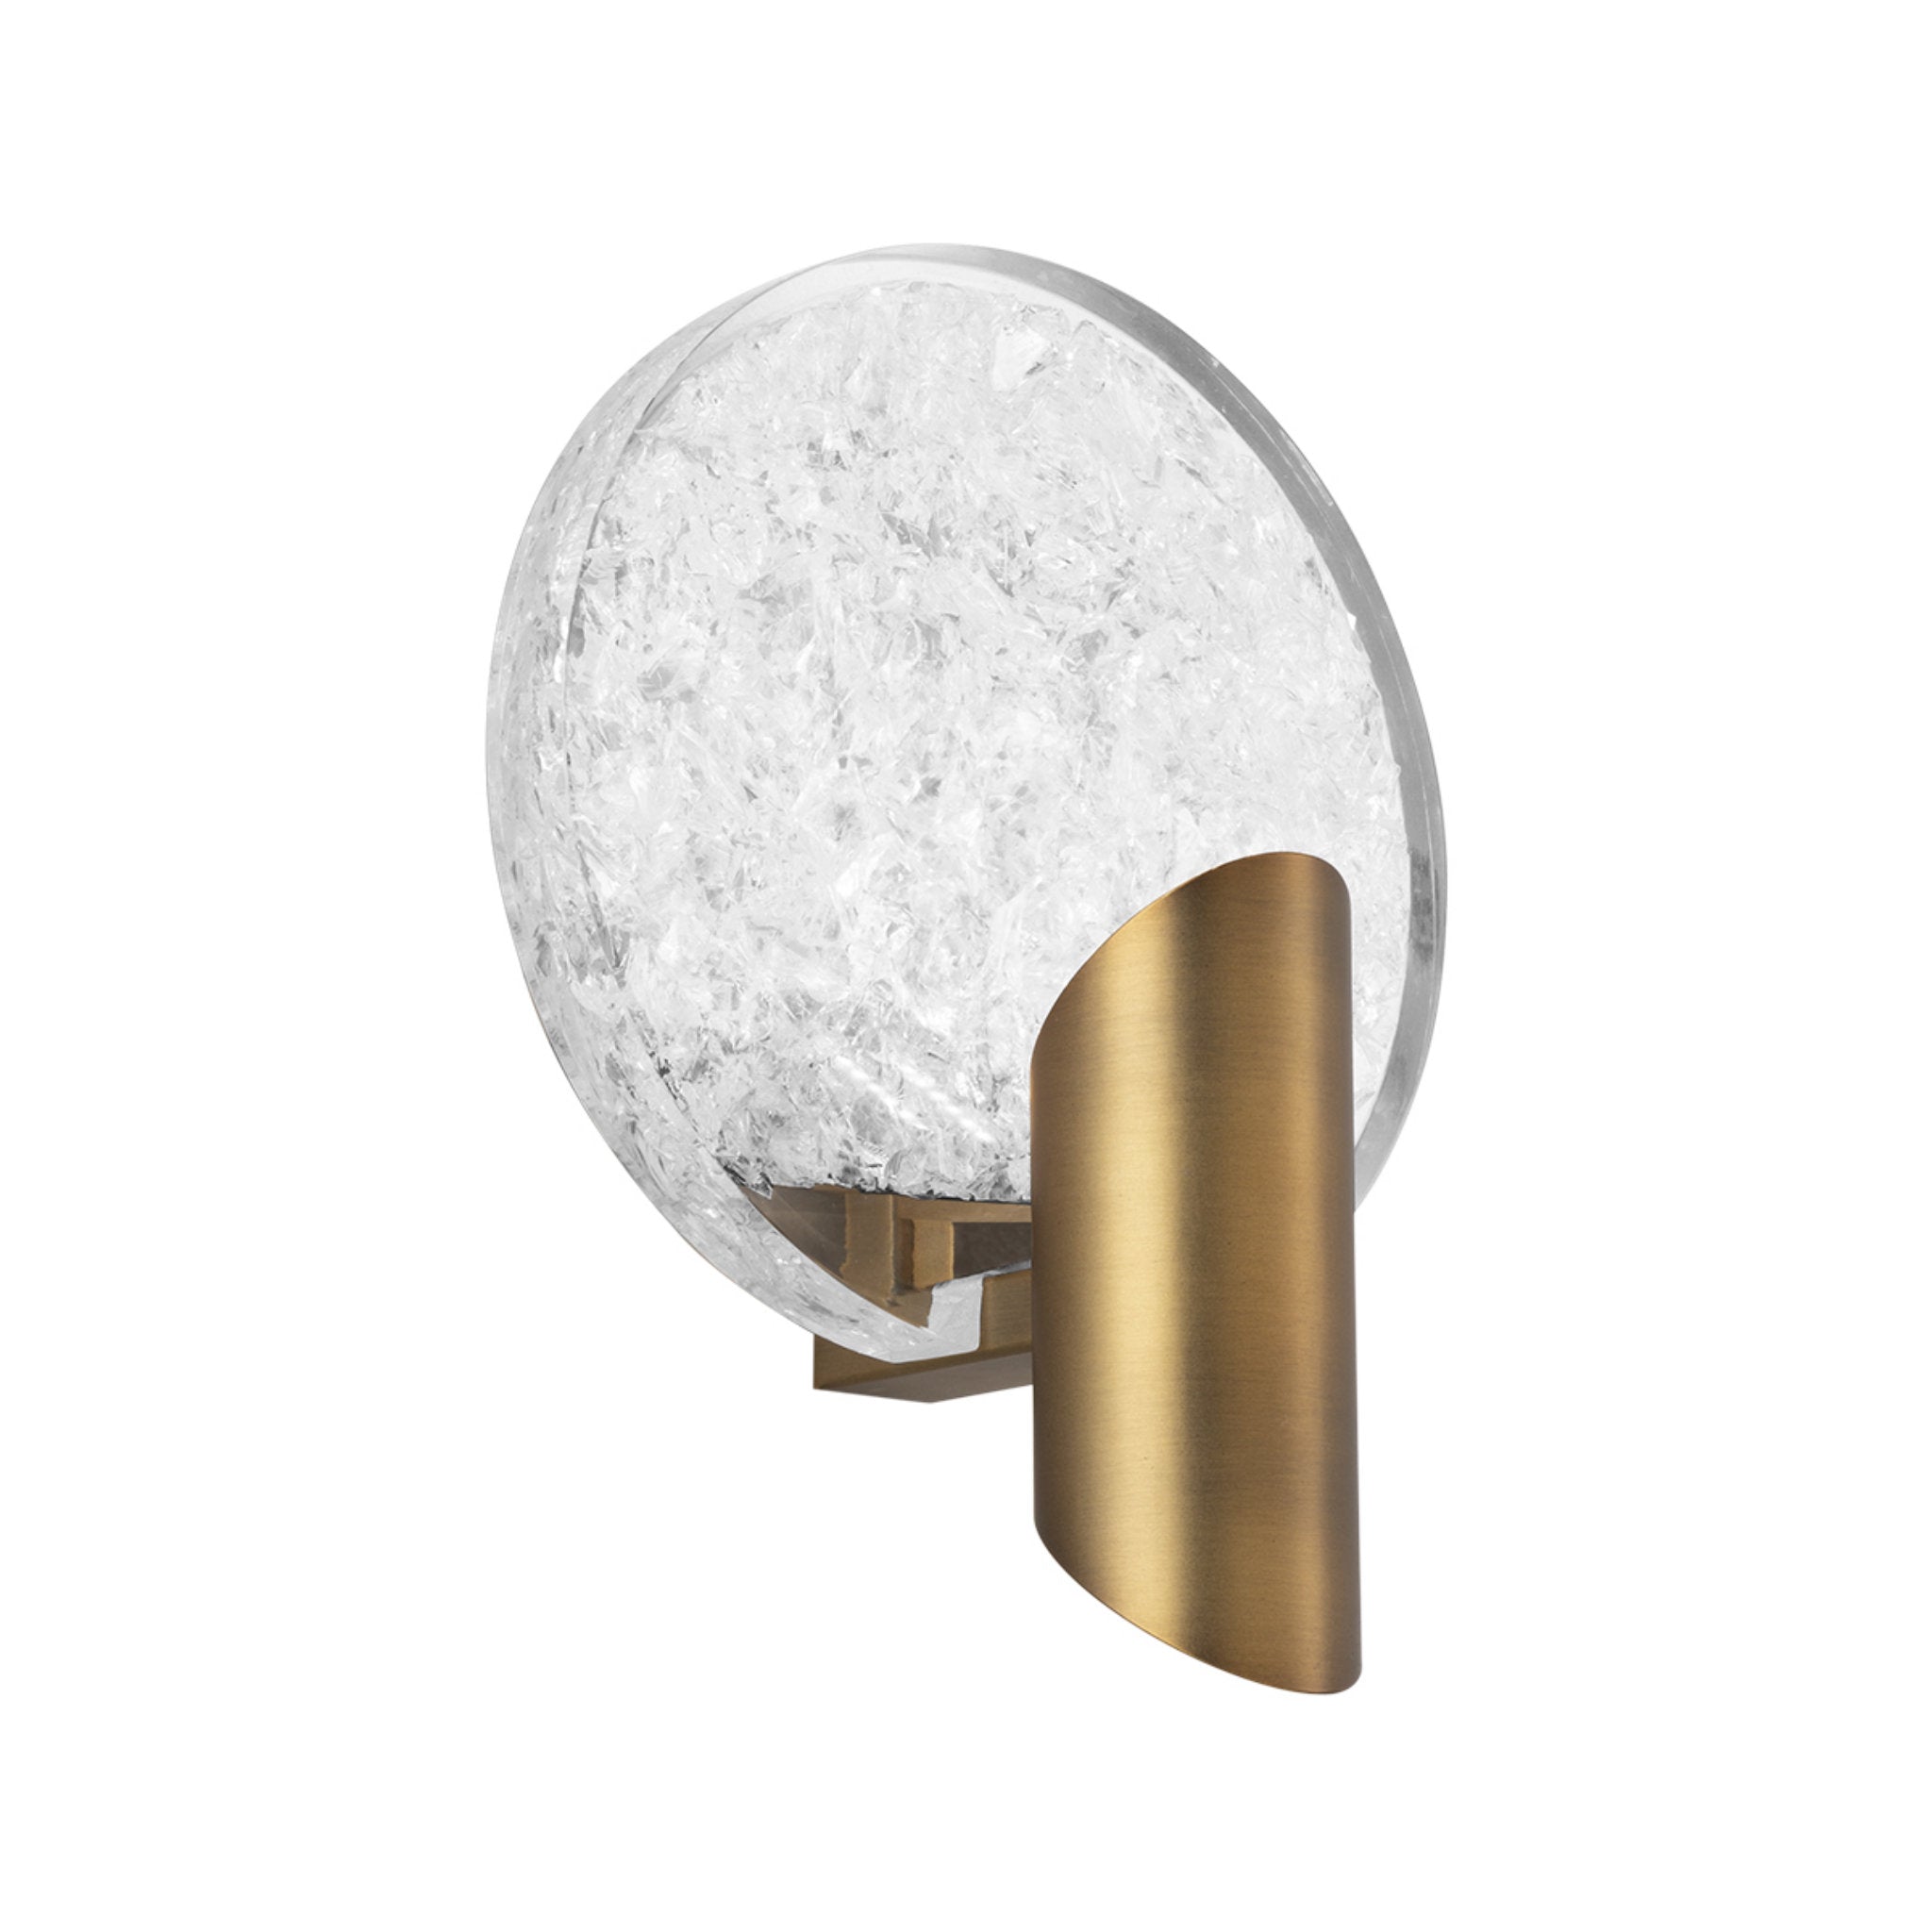 Modern Forms WS-69009-AB 3000K 11 Watt Oracle LED Wall Light in Aged Brass